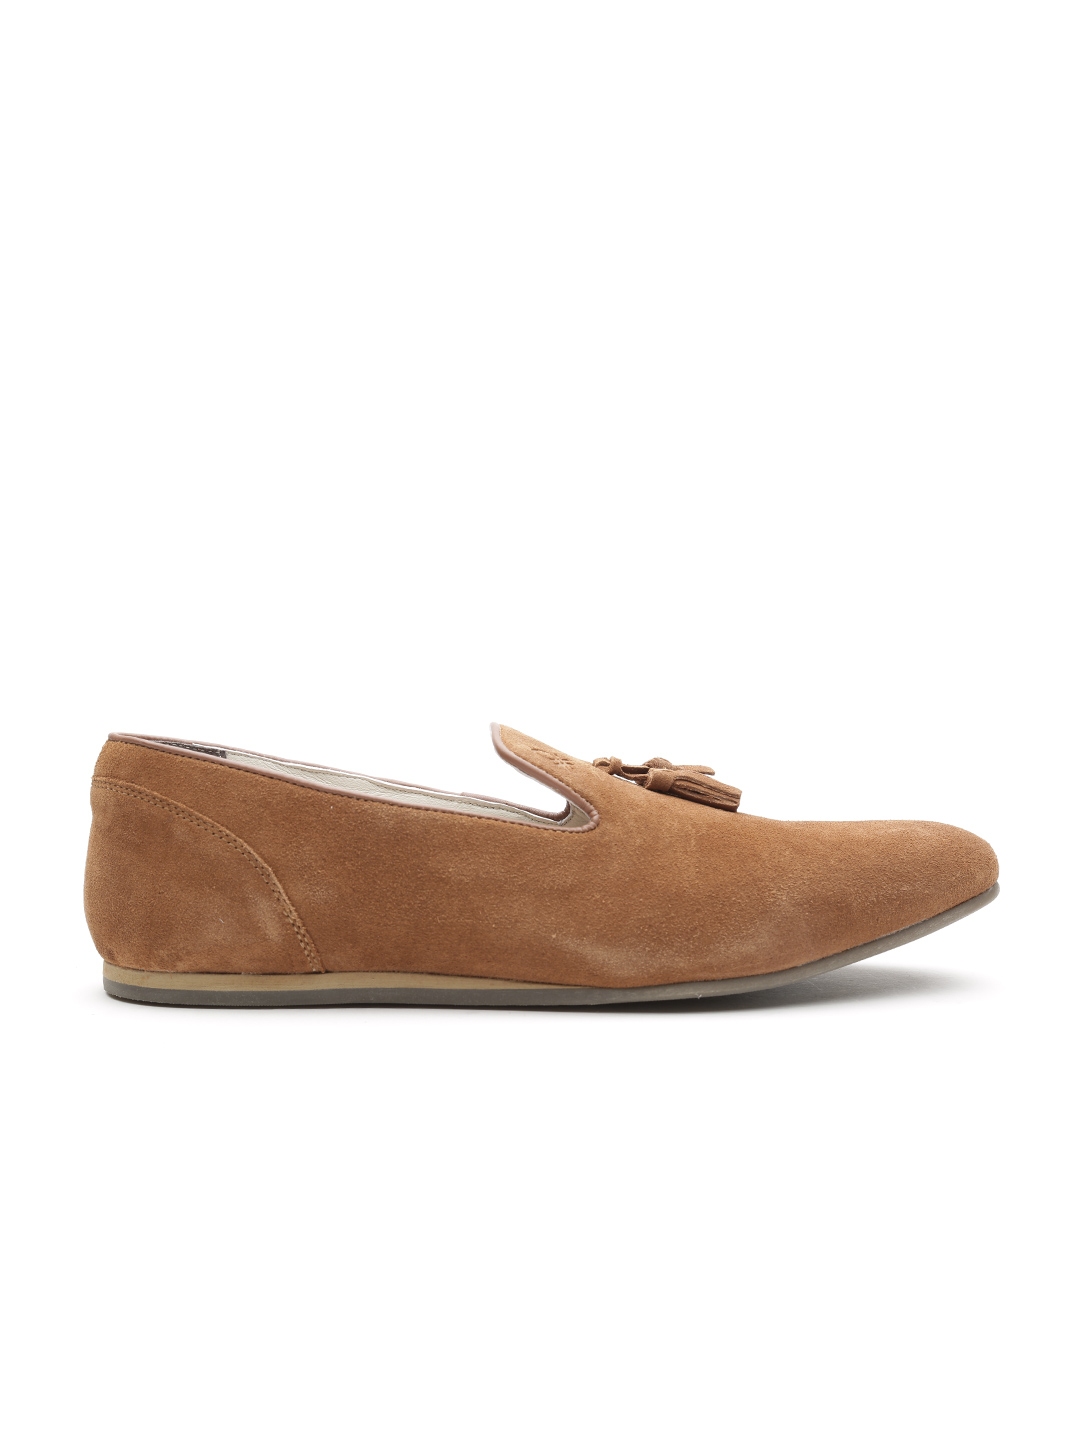 ucb shoes loafers